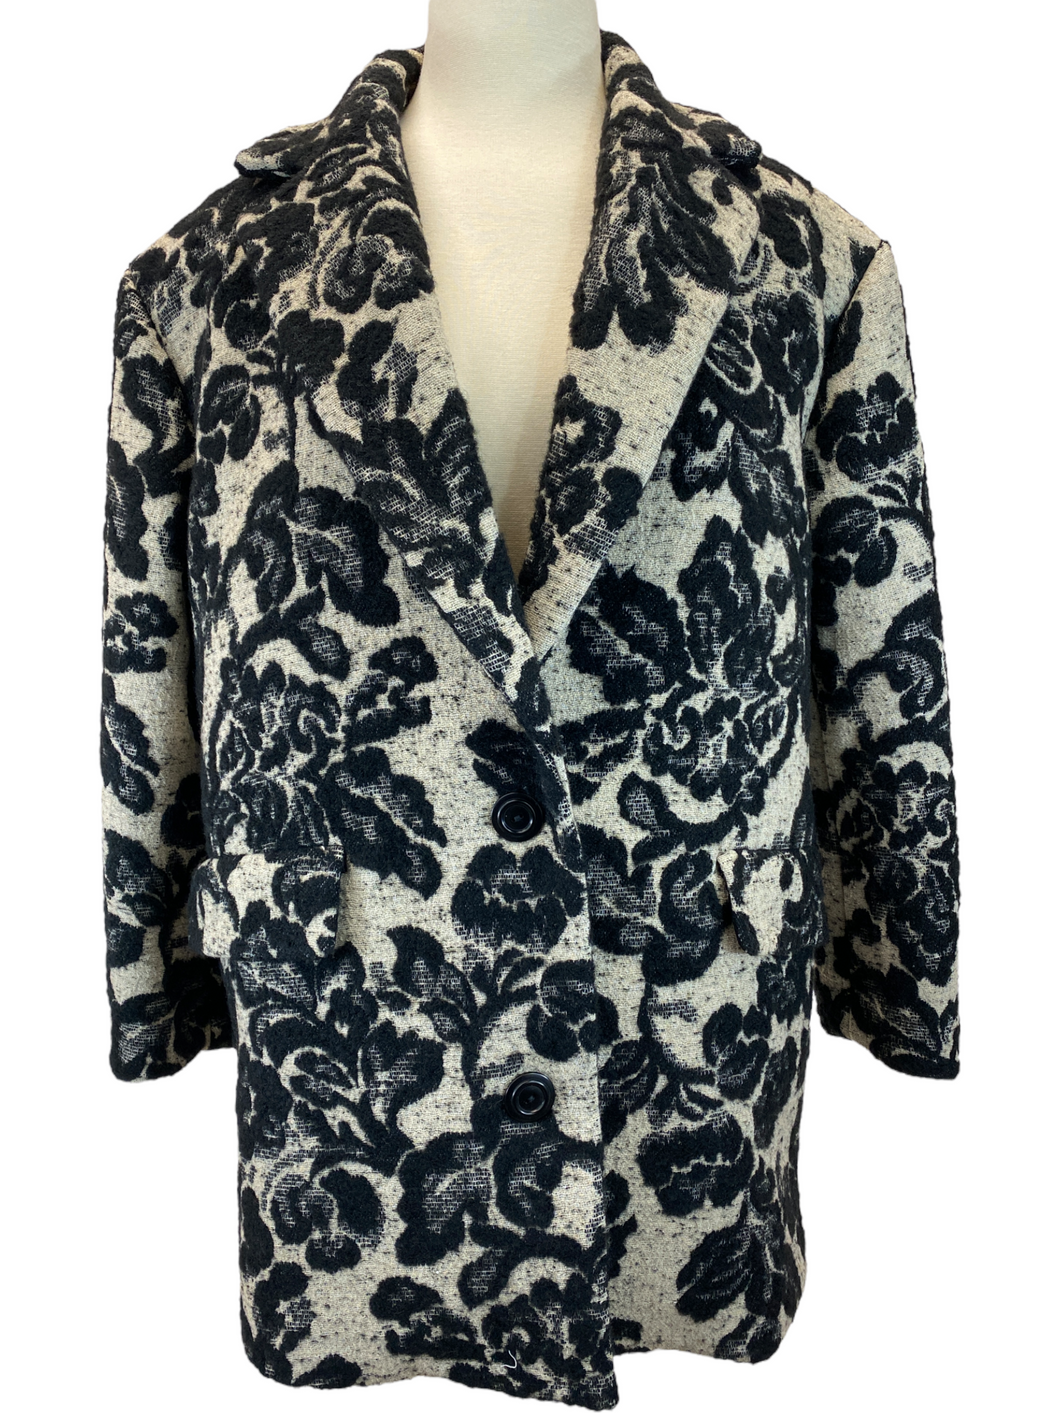 Purotatto Coat in Black and Tan Floral Brocade